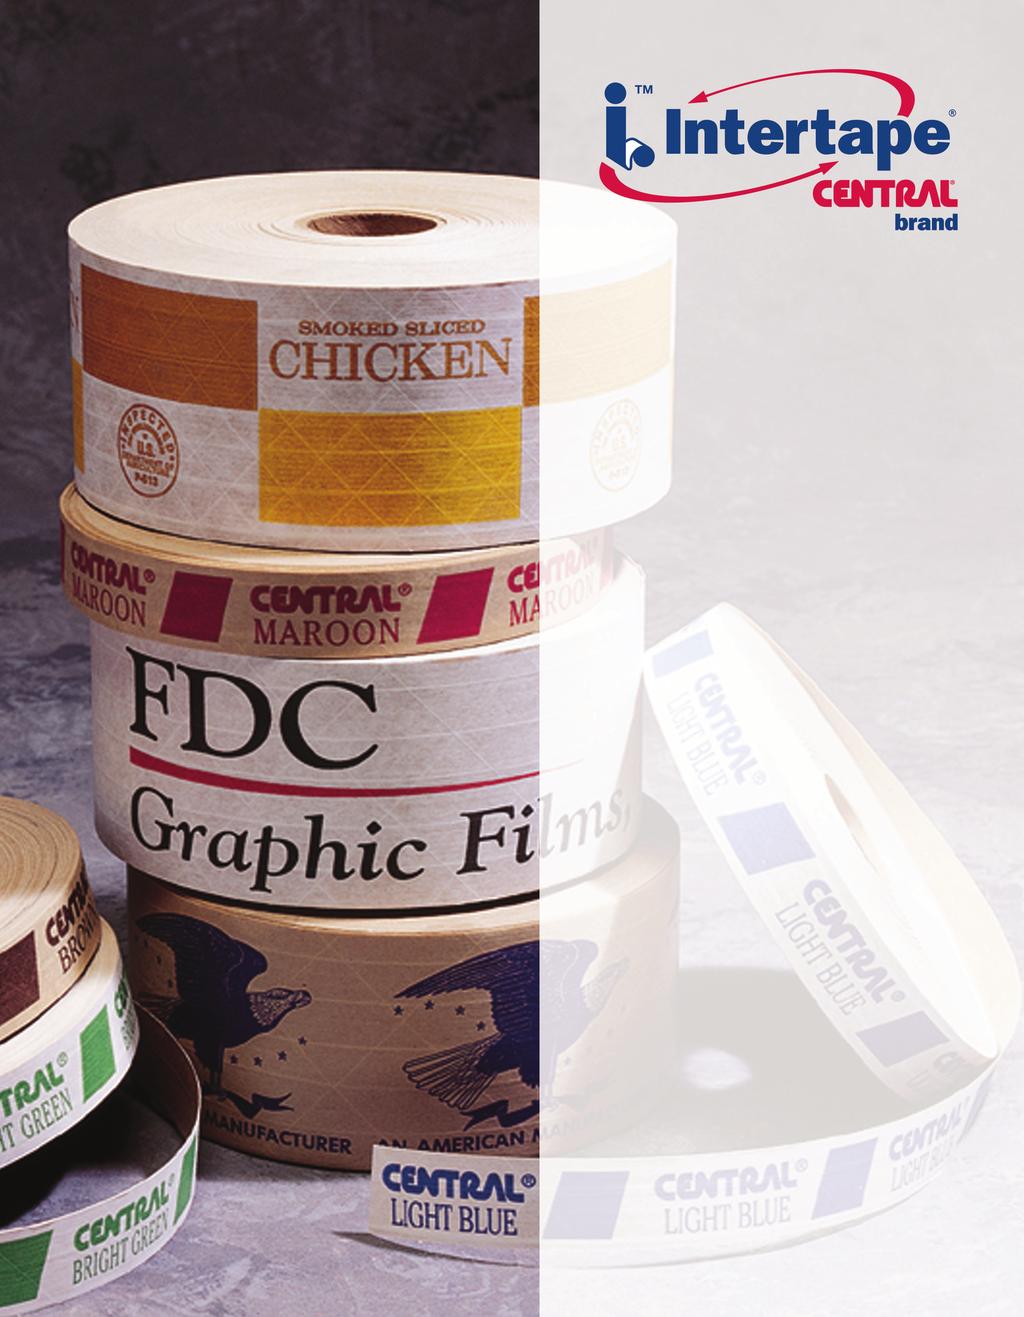 Seal Brand Loyalty with the Quick & Custom Print Program Custom (Q&C and Standard Grades) Prints are available specific to end user requirements. These may include logos, designs, colors, text, etc.